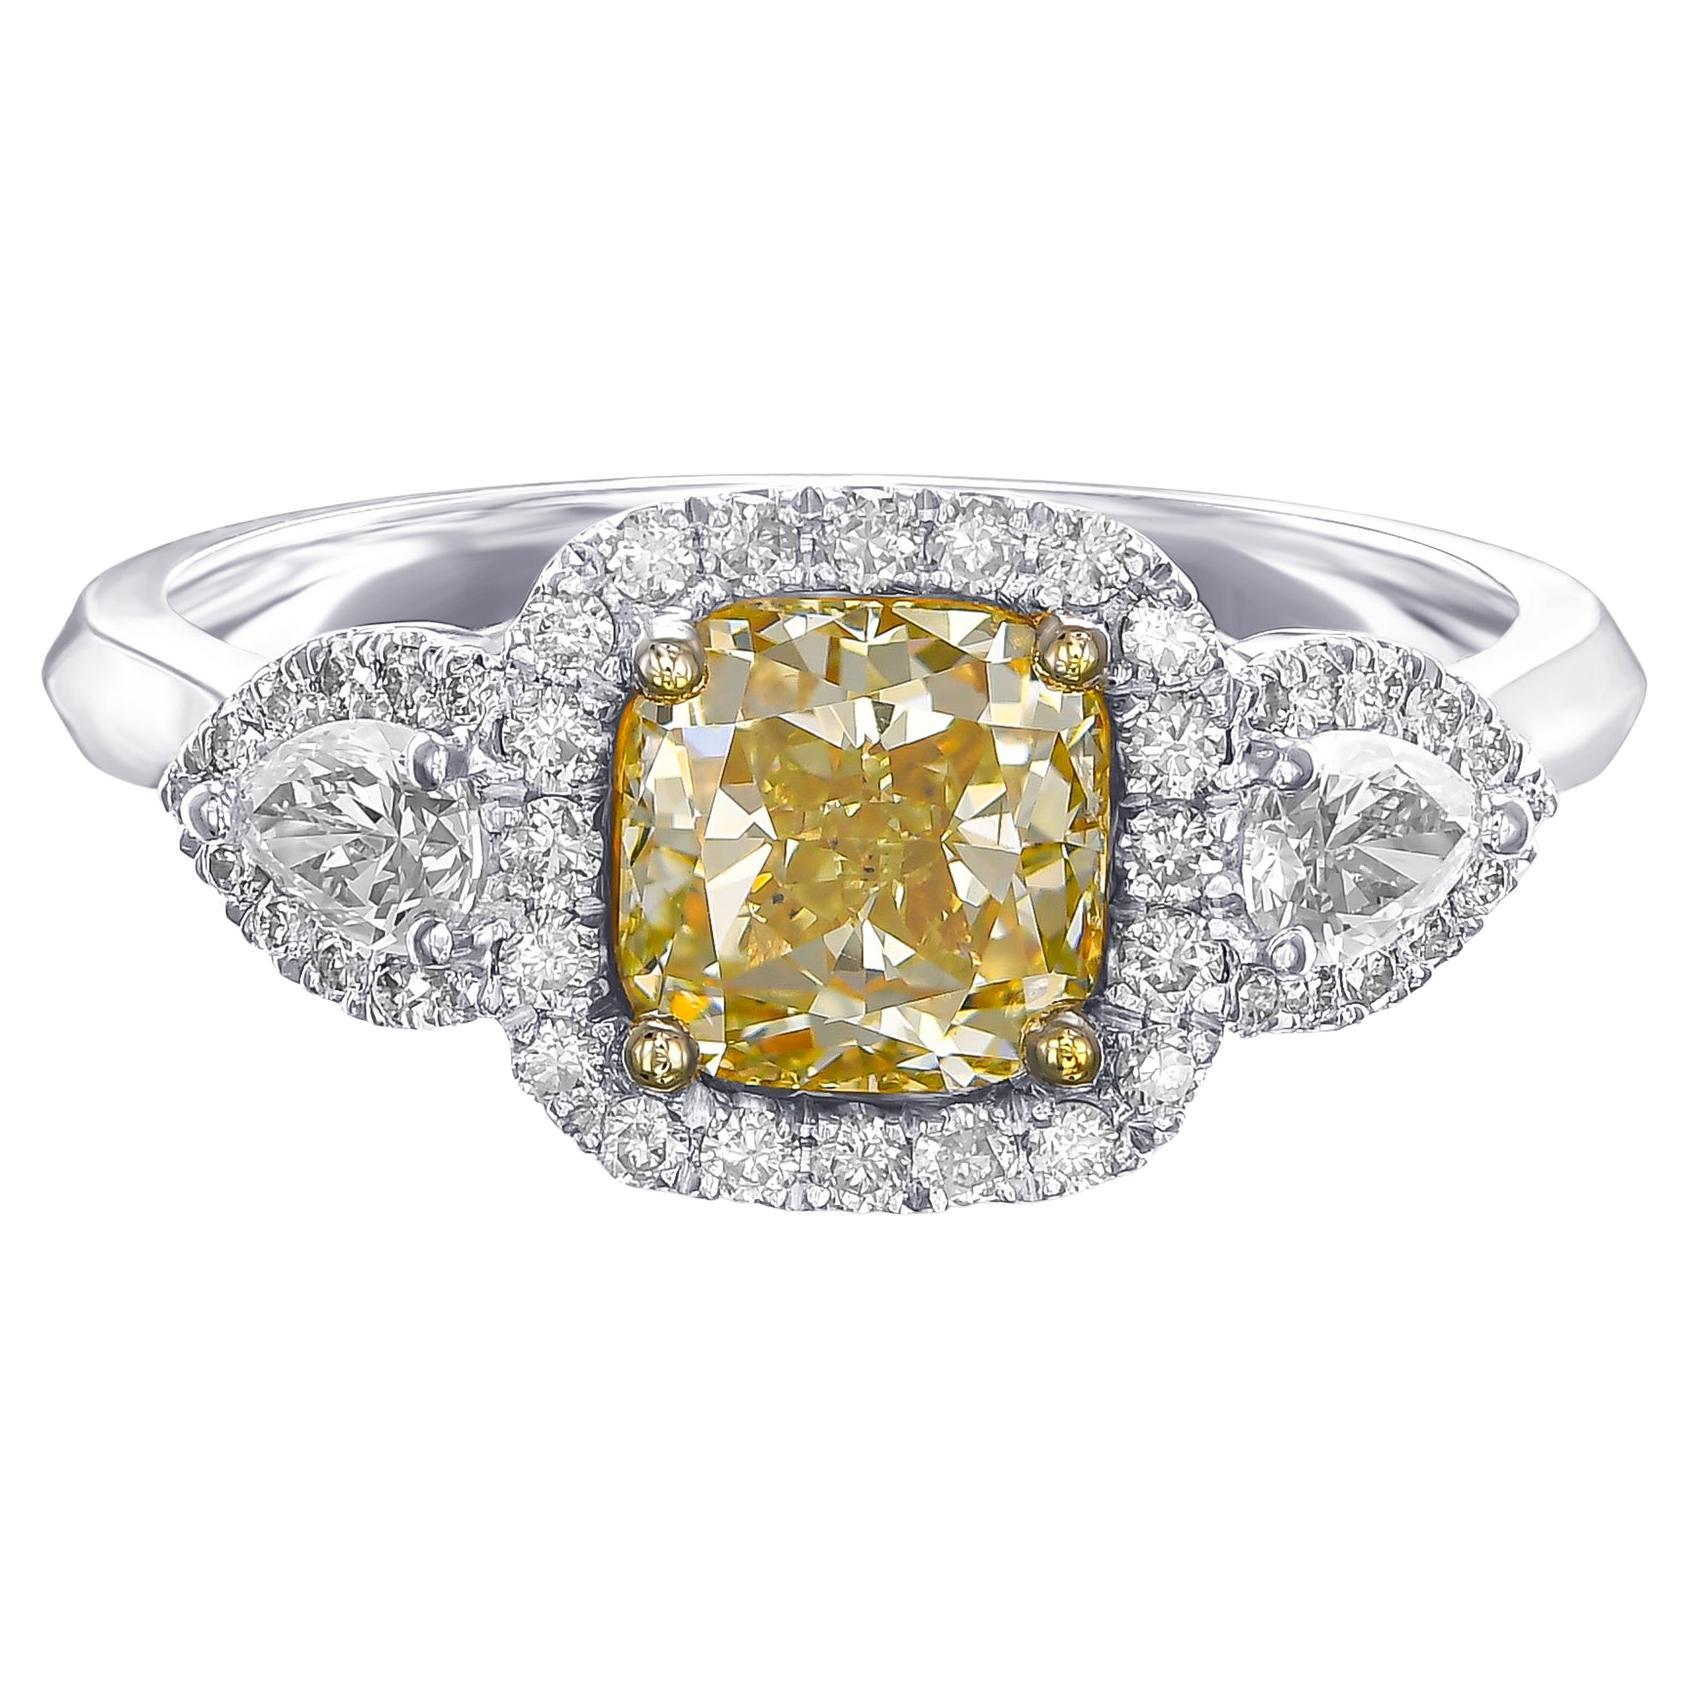 Today we are offering this amazing 2.10 total carat weight Fancy Light Yellow diamond engagement ring.

A natural 1.50 carat diamond main stone, accented with 0.60 total carat weight of white diamonds - a once in a lifetime opportunity to become the